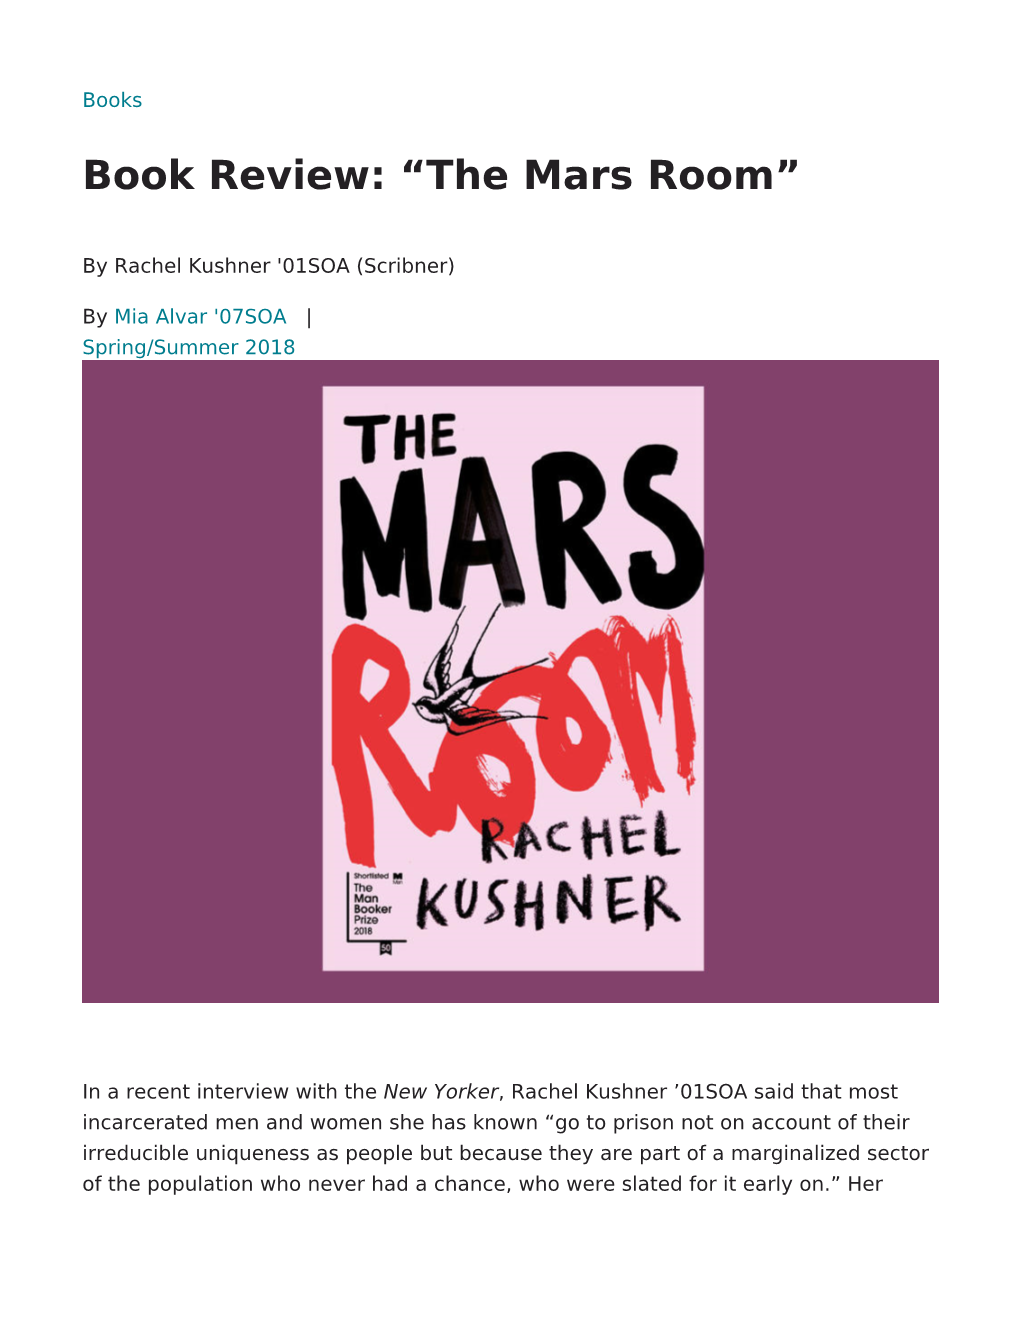 View: “The Mars Room”